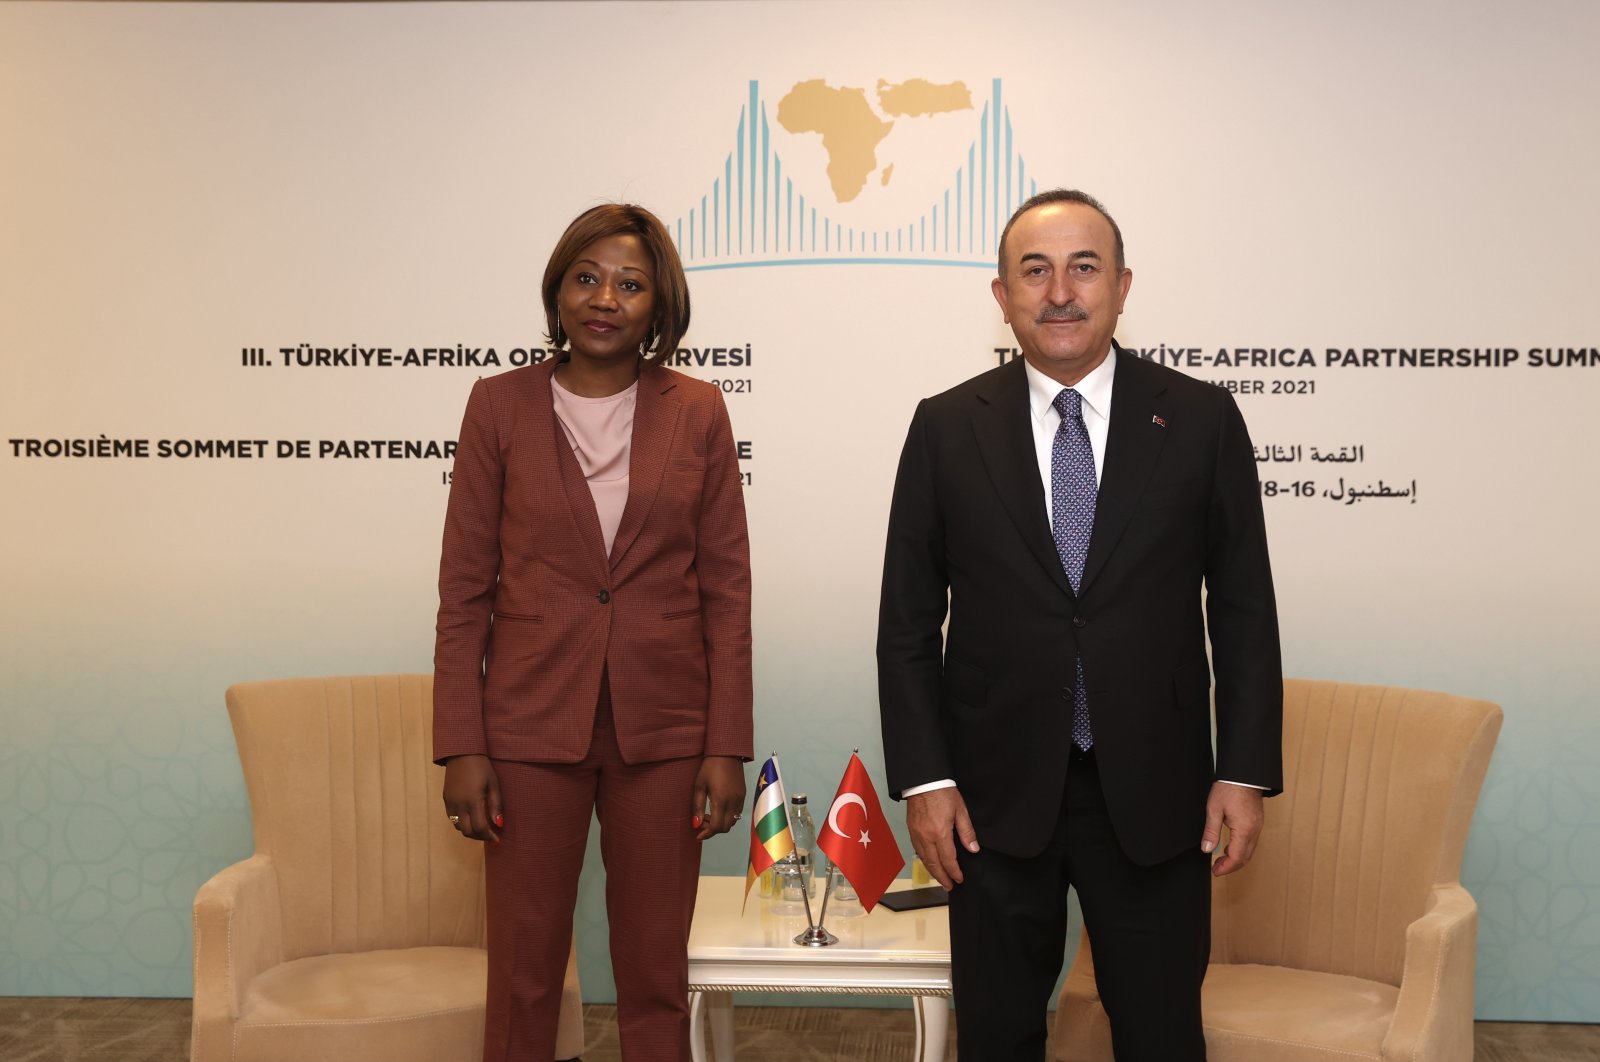 Foreign Minister Mevlüt Çavuşoğlu (R) poses with his counterpart from the Central African Republic, Sylvie Baipo Temon, during the 3rd Turkey-Africa Partnership Summit in Istanbul, Turkey, Dec. 16, 2021. (AA Photo)